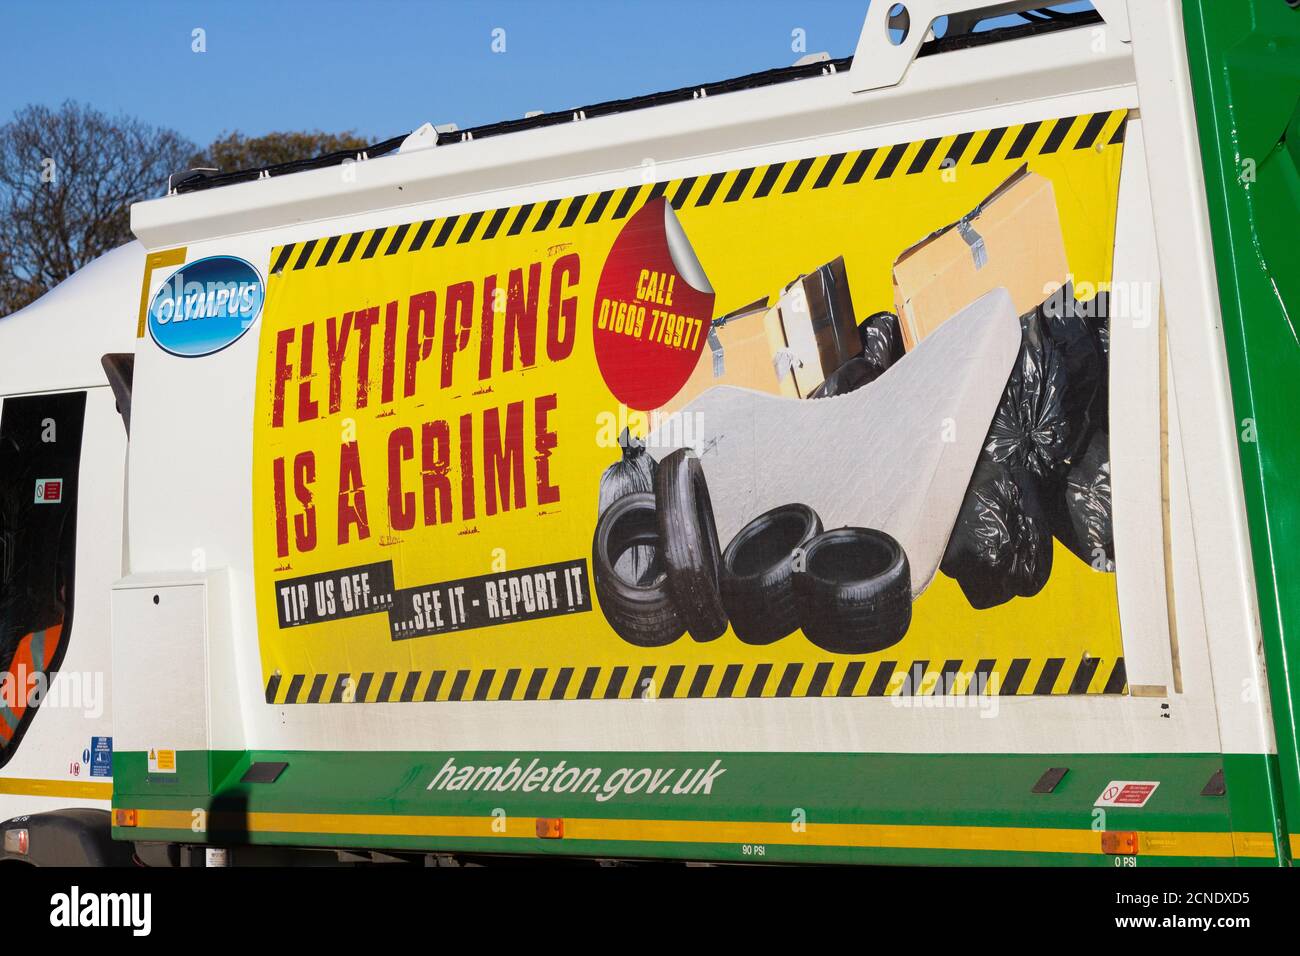 Flytipping is a crime poster on side of rubbish collection truck, lorry. UK Stock Photo